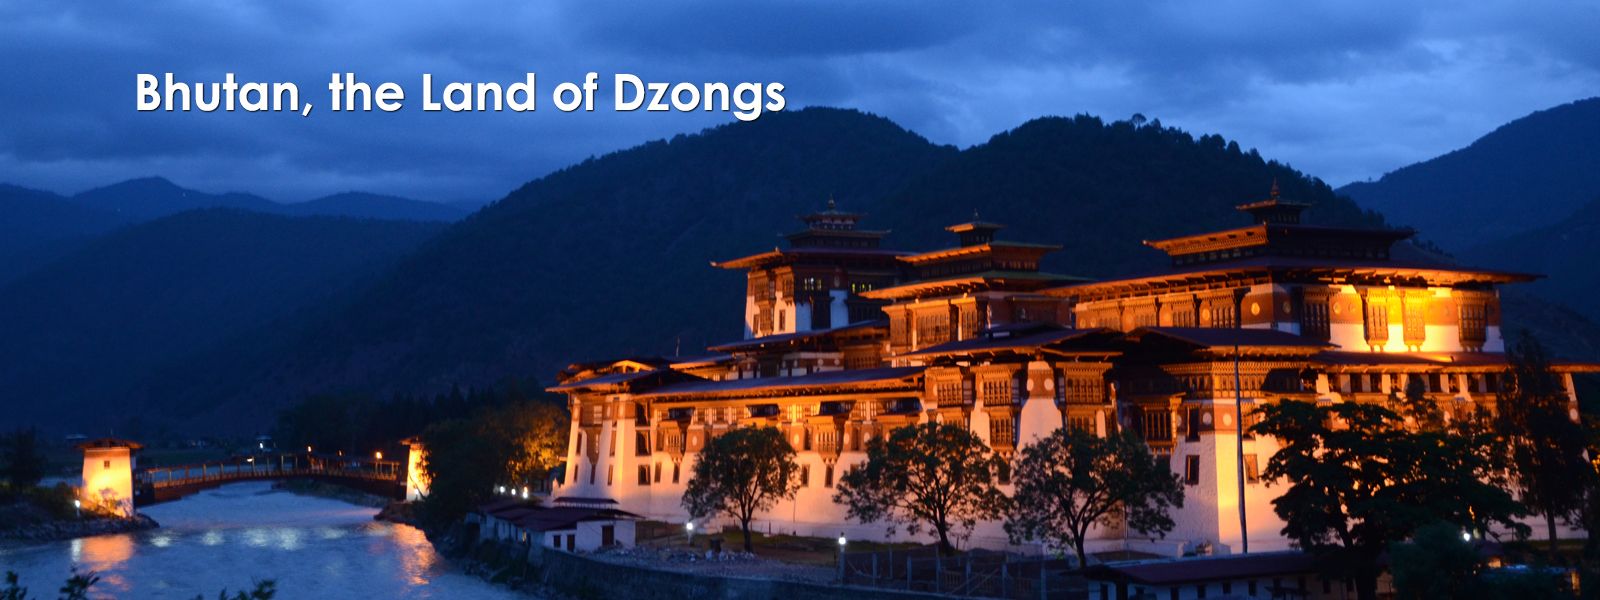 Bhutan Tours for the Experience of Unique Art, Architecture, Tradition and Culture